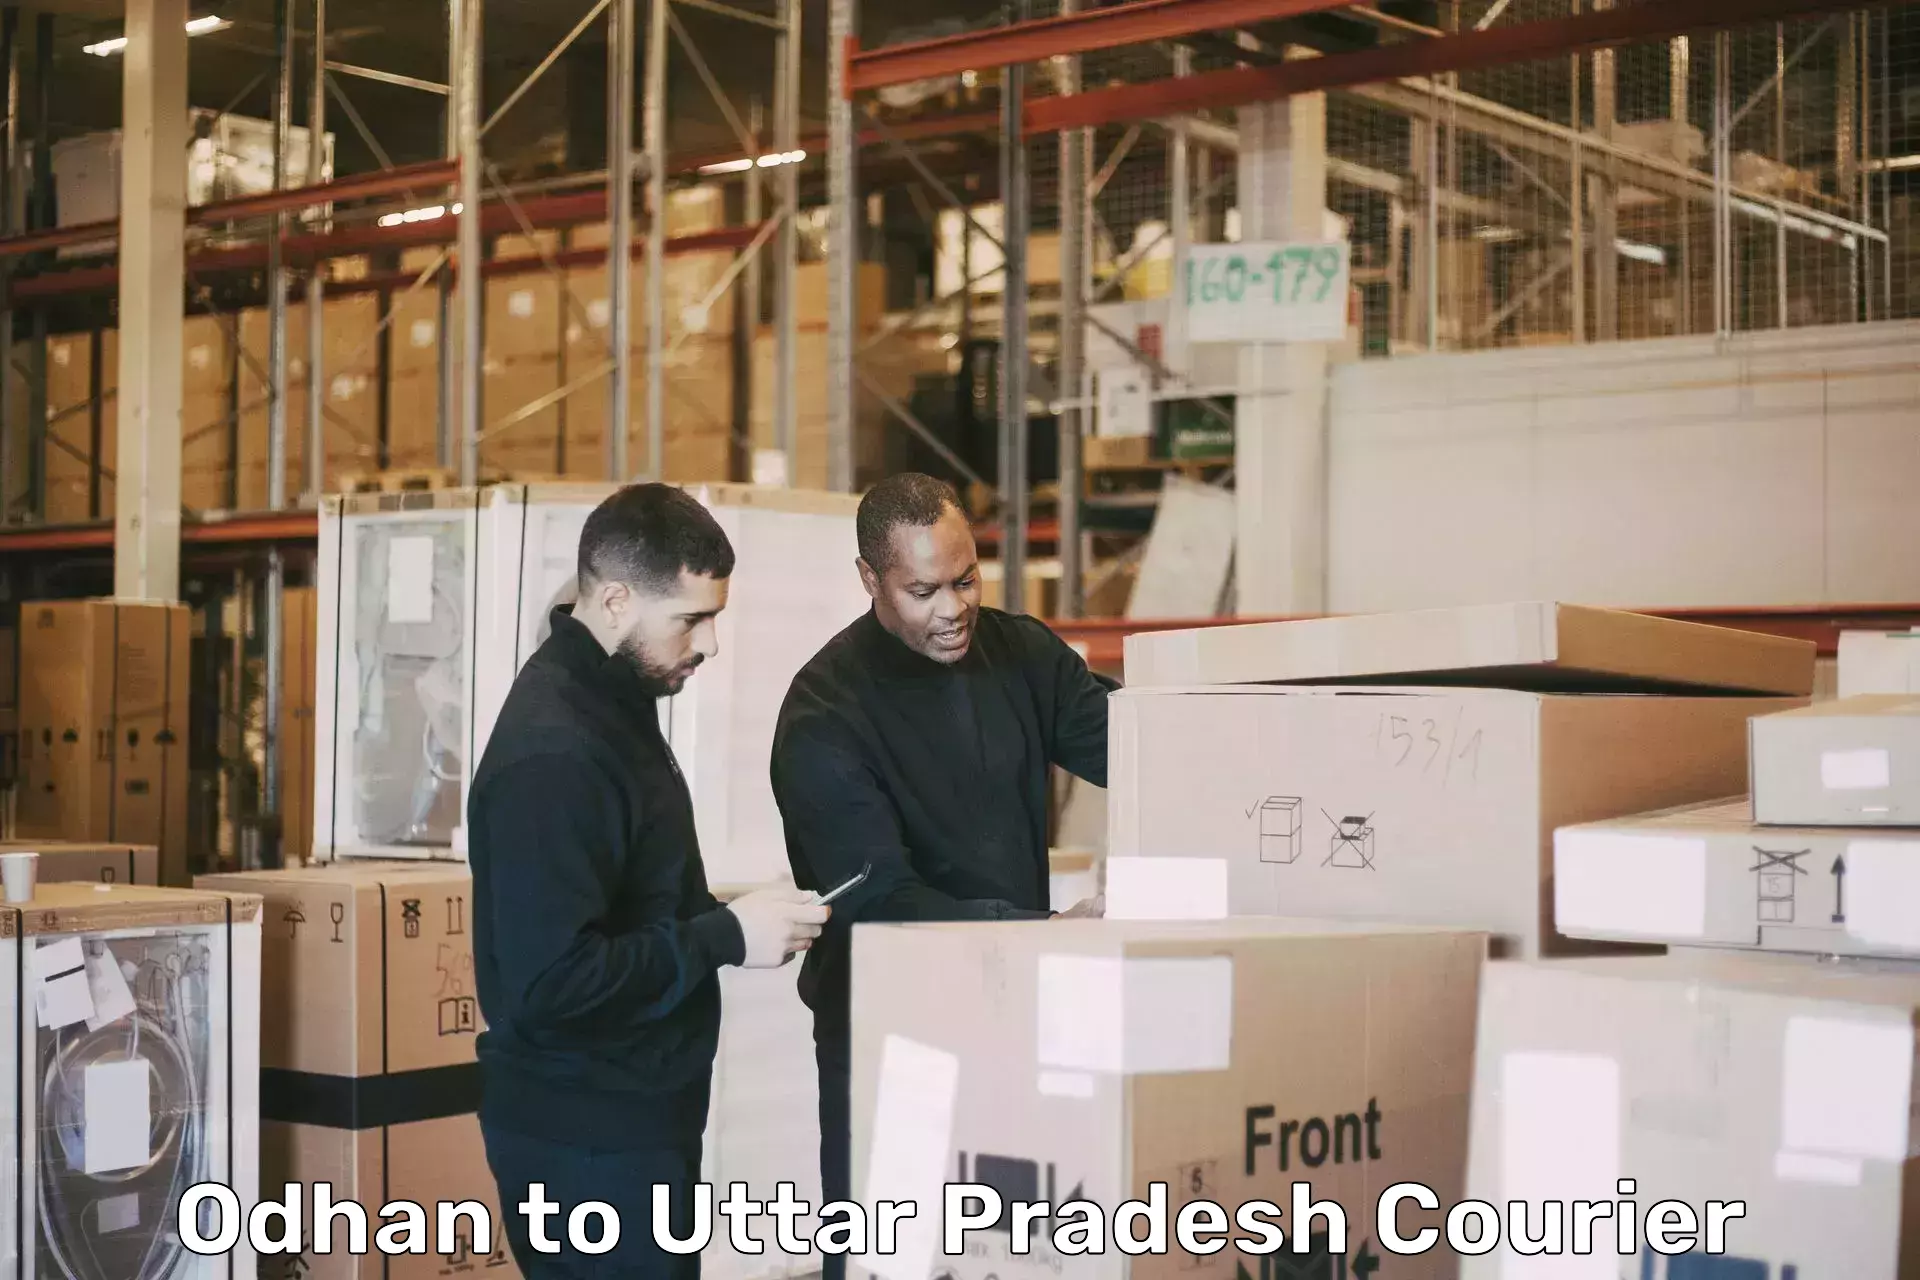 High-quality moving services in Odhan to Gorakhpur